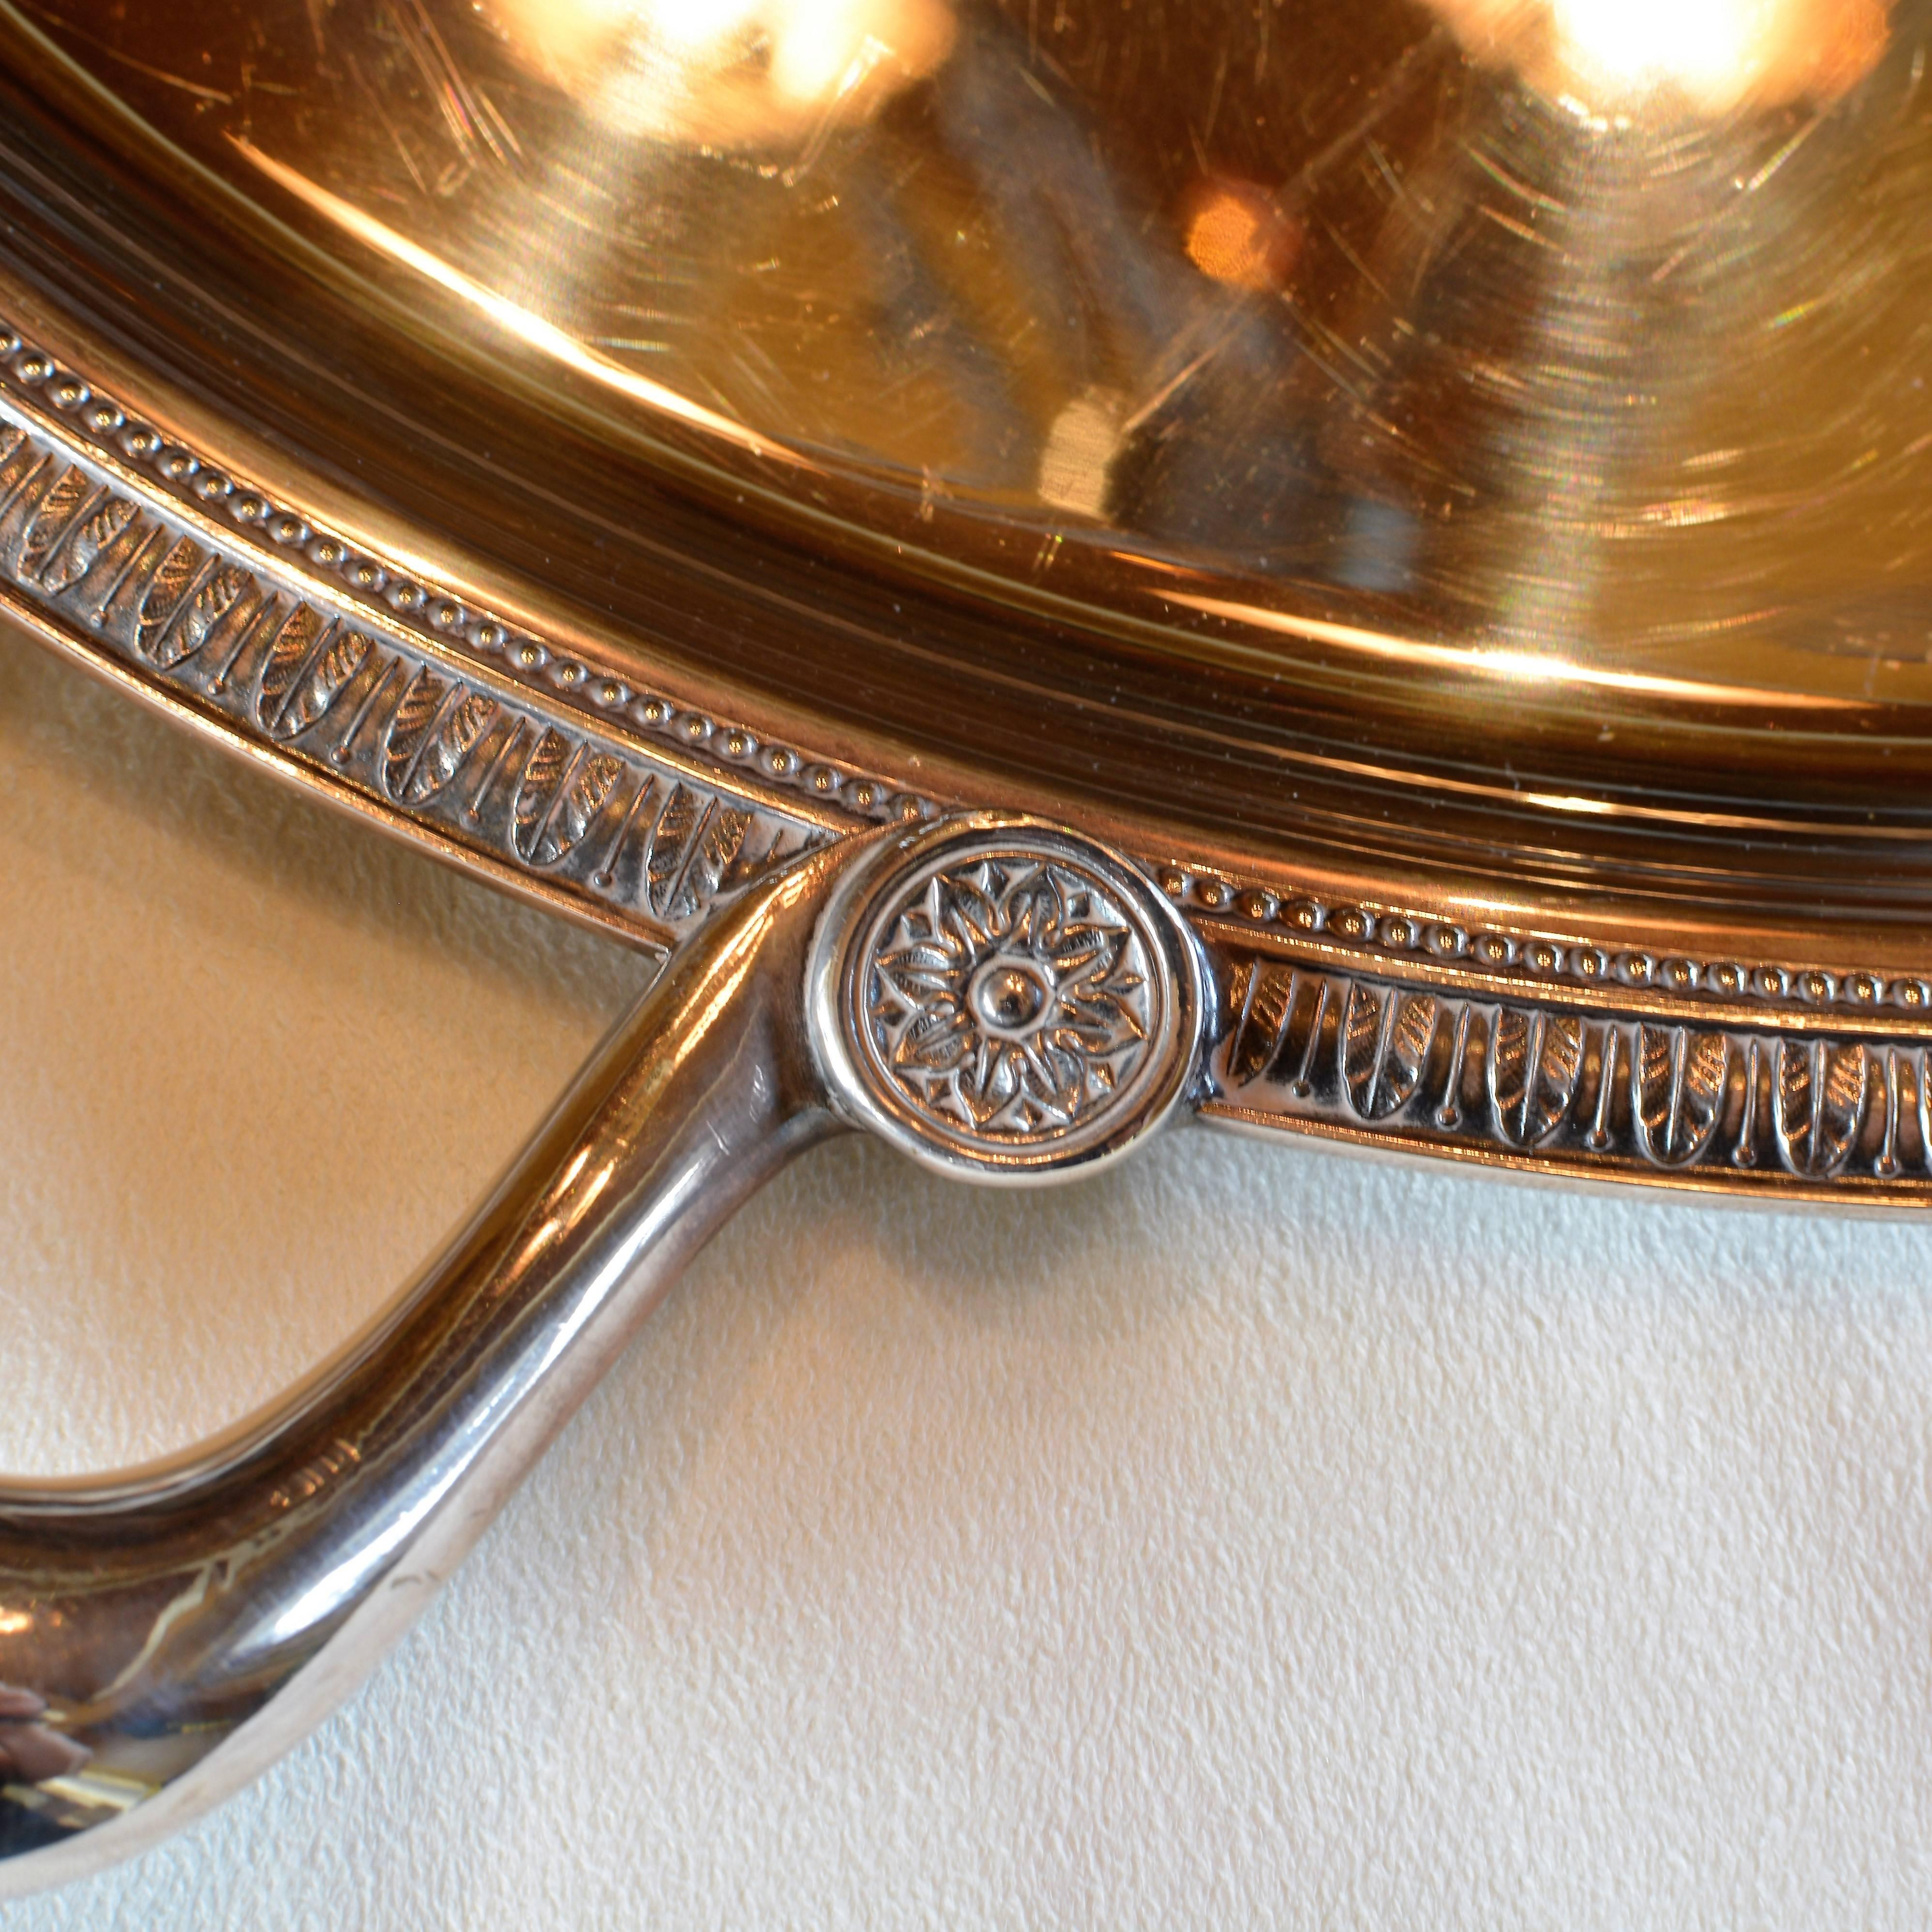 The Malmaison pattern large silver plated oval tray with two handles ideal for beverage service or tray-passed appetizers at any event. The name is a nod to the Chateau de la Malmaison, a favored Parisian residence of Napoleon Bonaparte and Empress